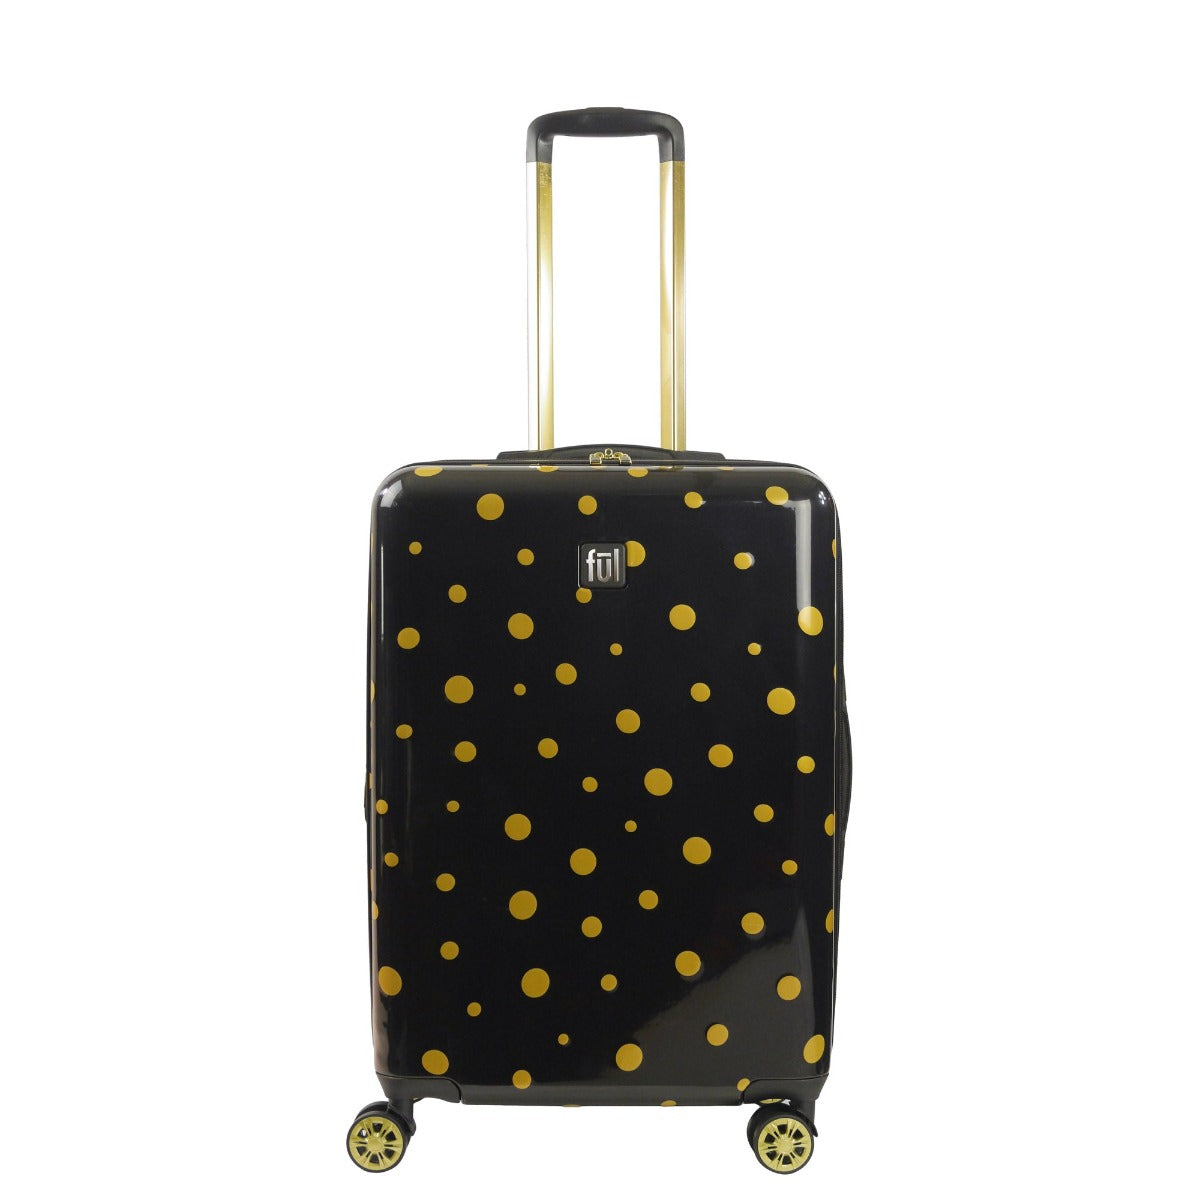 Ful Impulse Mixed Dots hardside spinner 26 inch checked luggage black gold suitcase